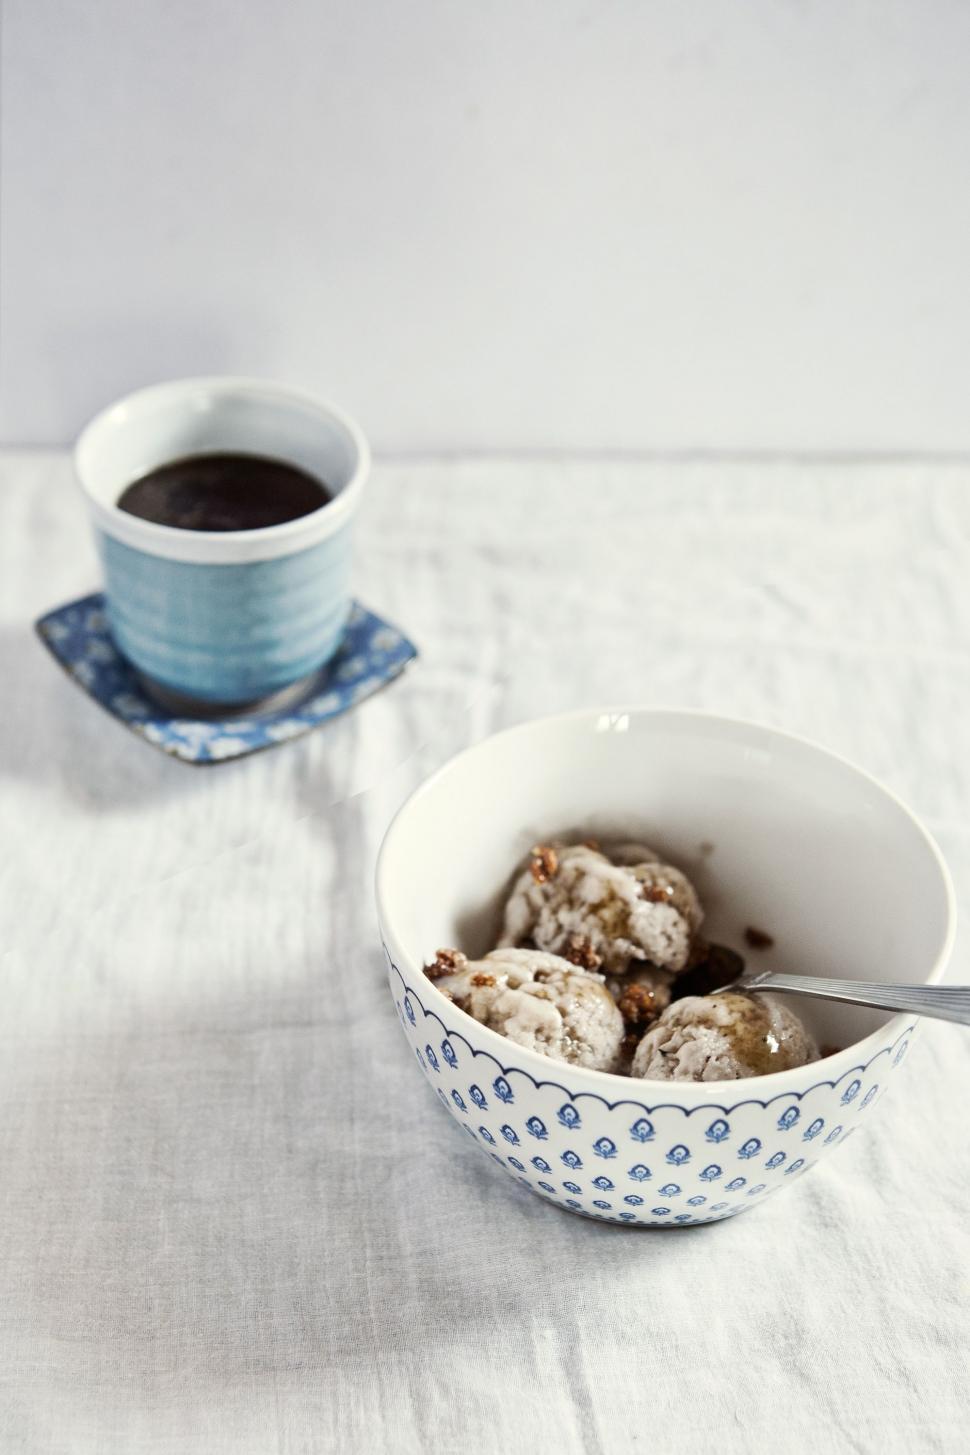 Free Image of A Bowl of Cookies and a Cup of Coffee 